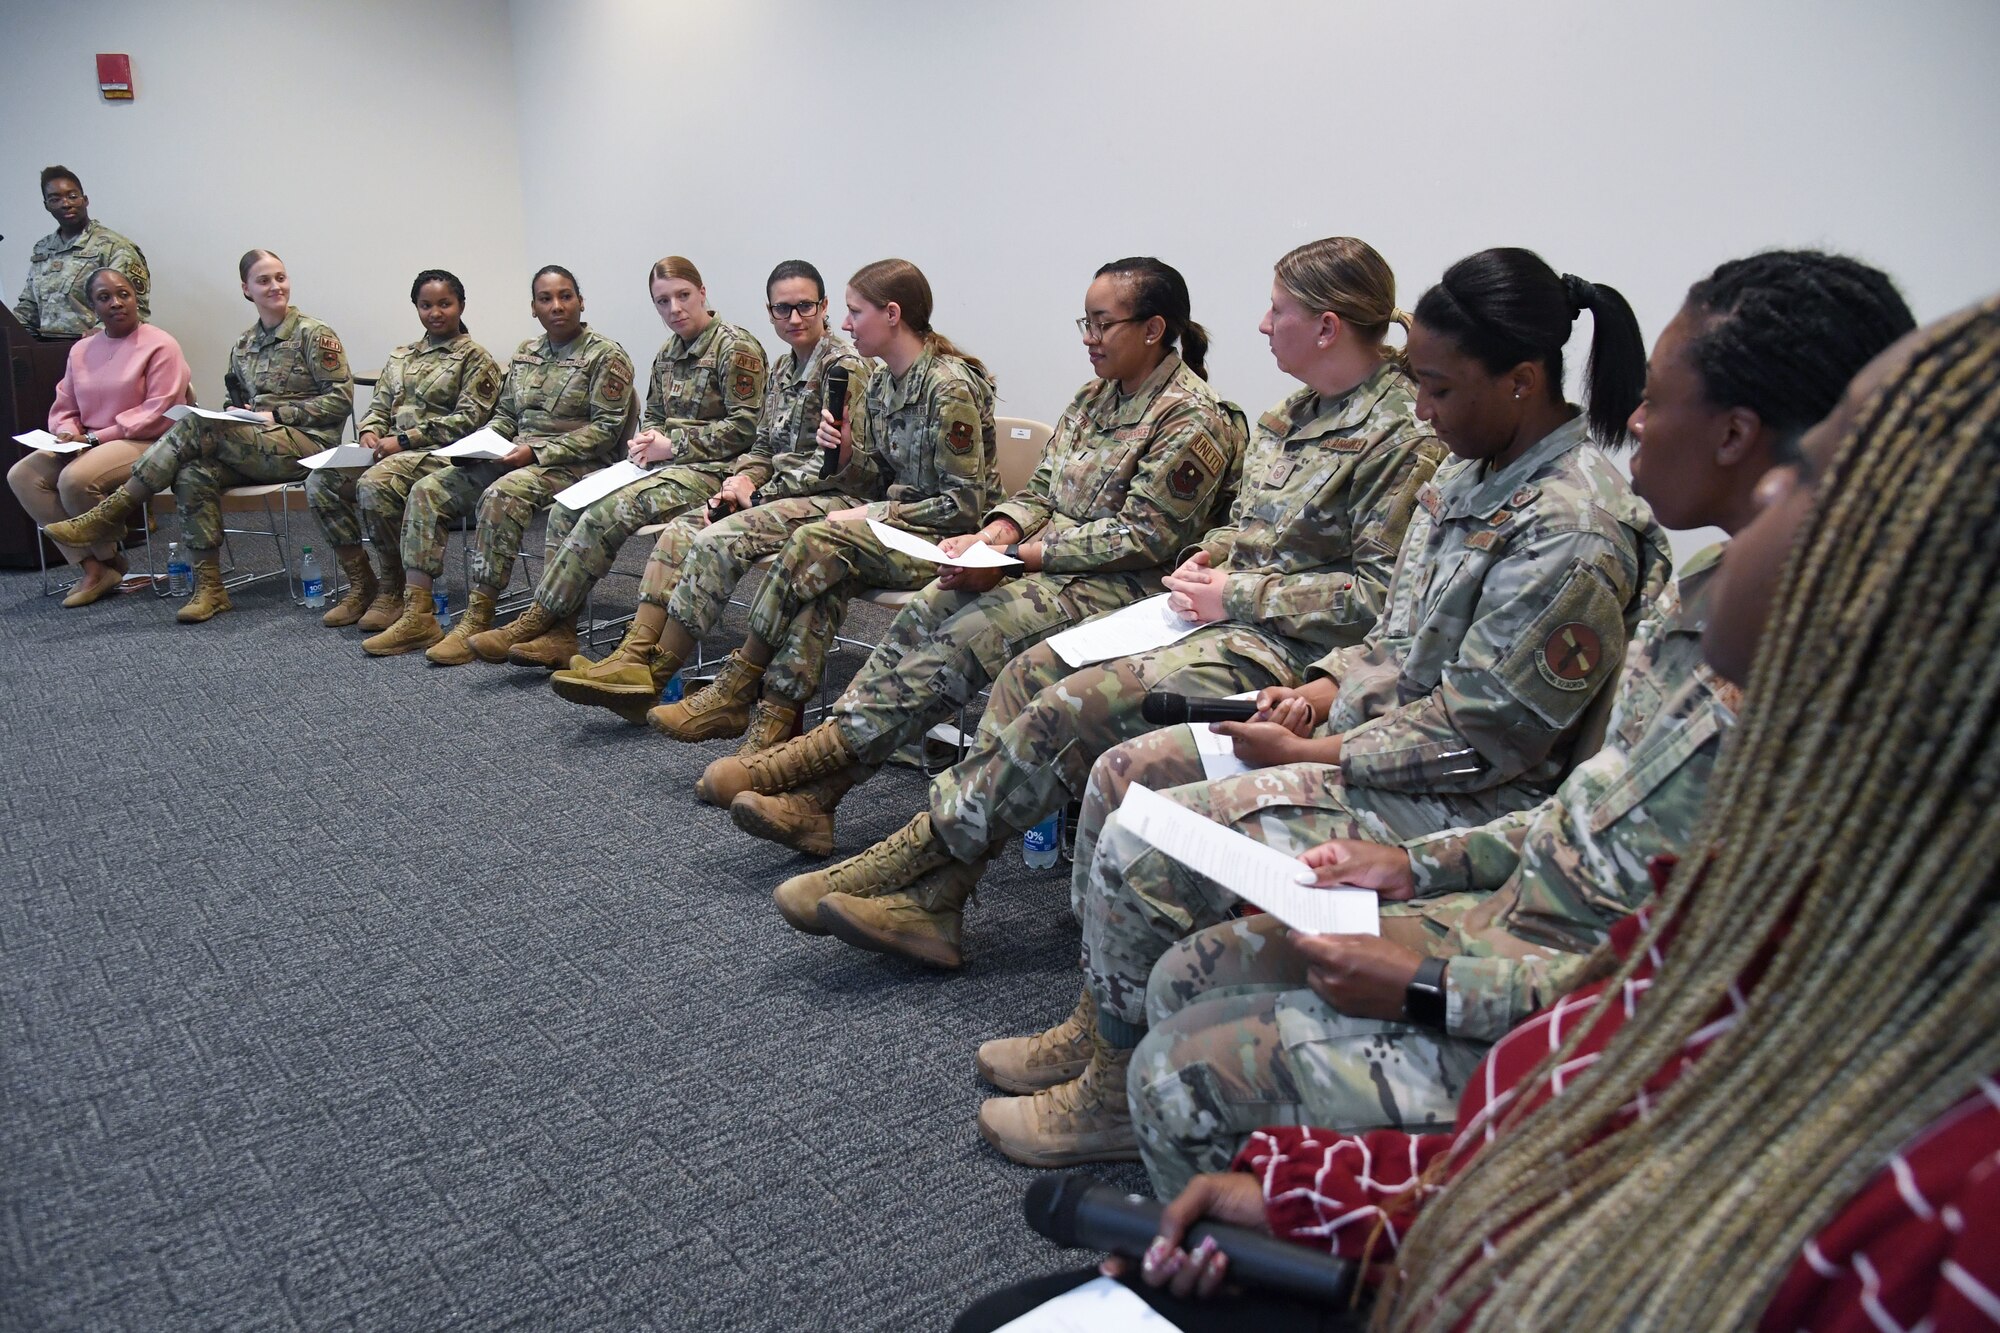 Keesler personnel participate in the Women's History Month Diversity and Inclusion Panel inside the Roberts Consolidated Aircraft Maintenance Facility at Keesler Air Force Base, Mississippi, March 10, 2023.